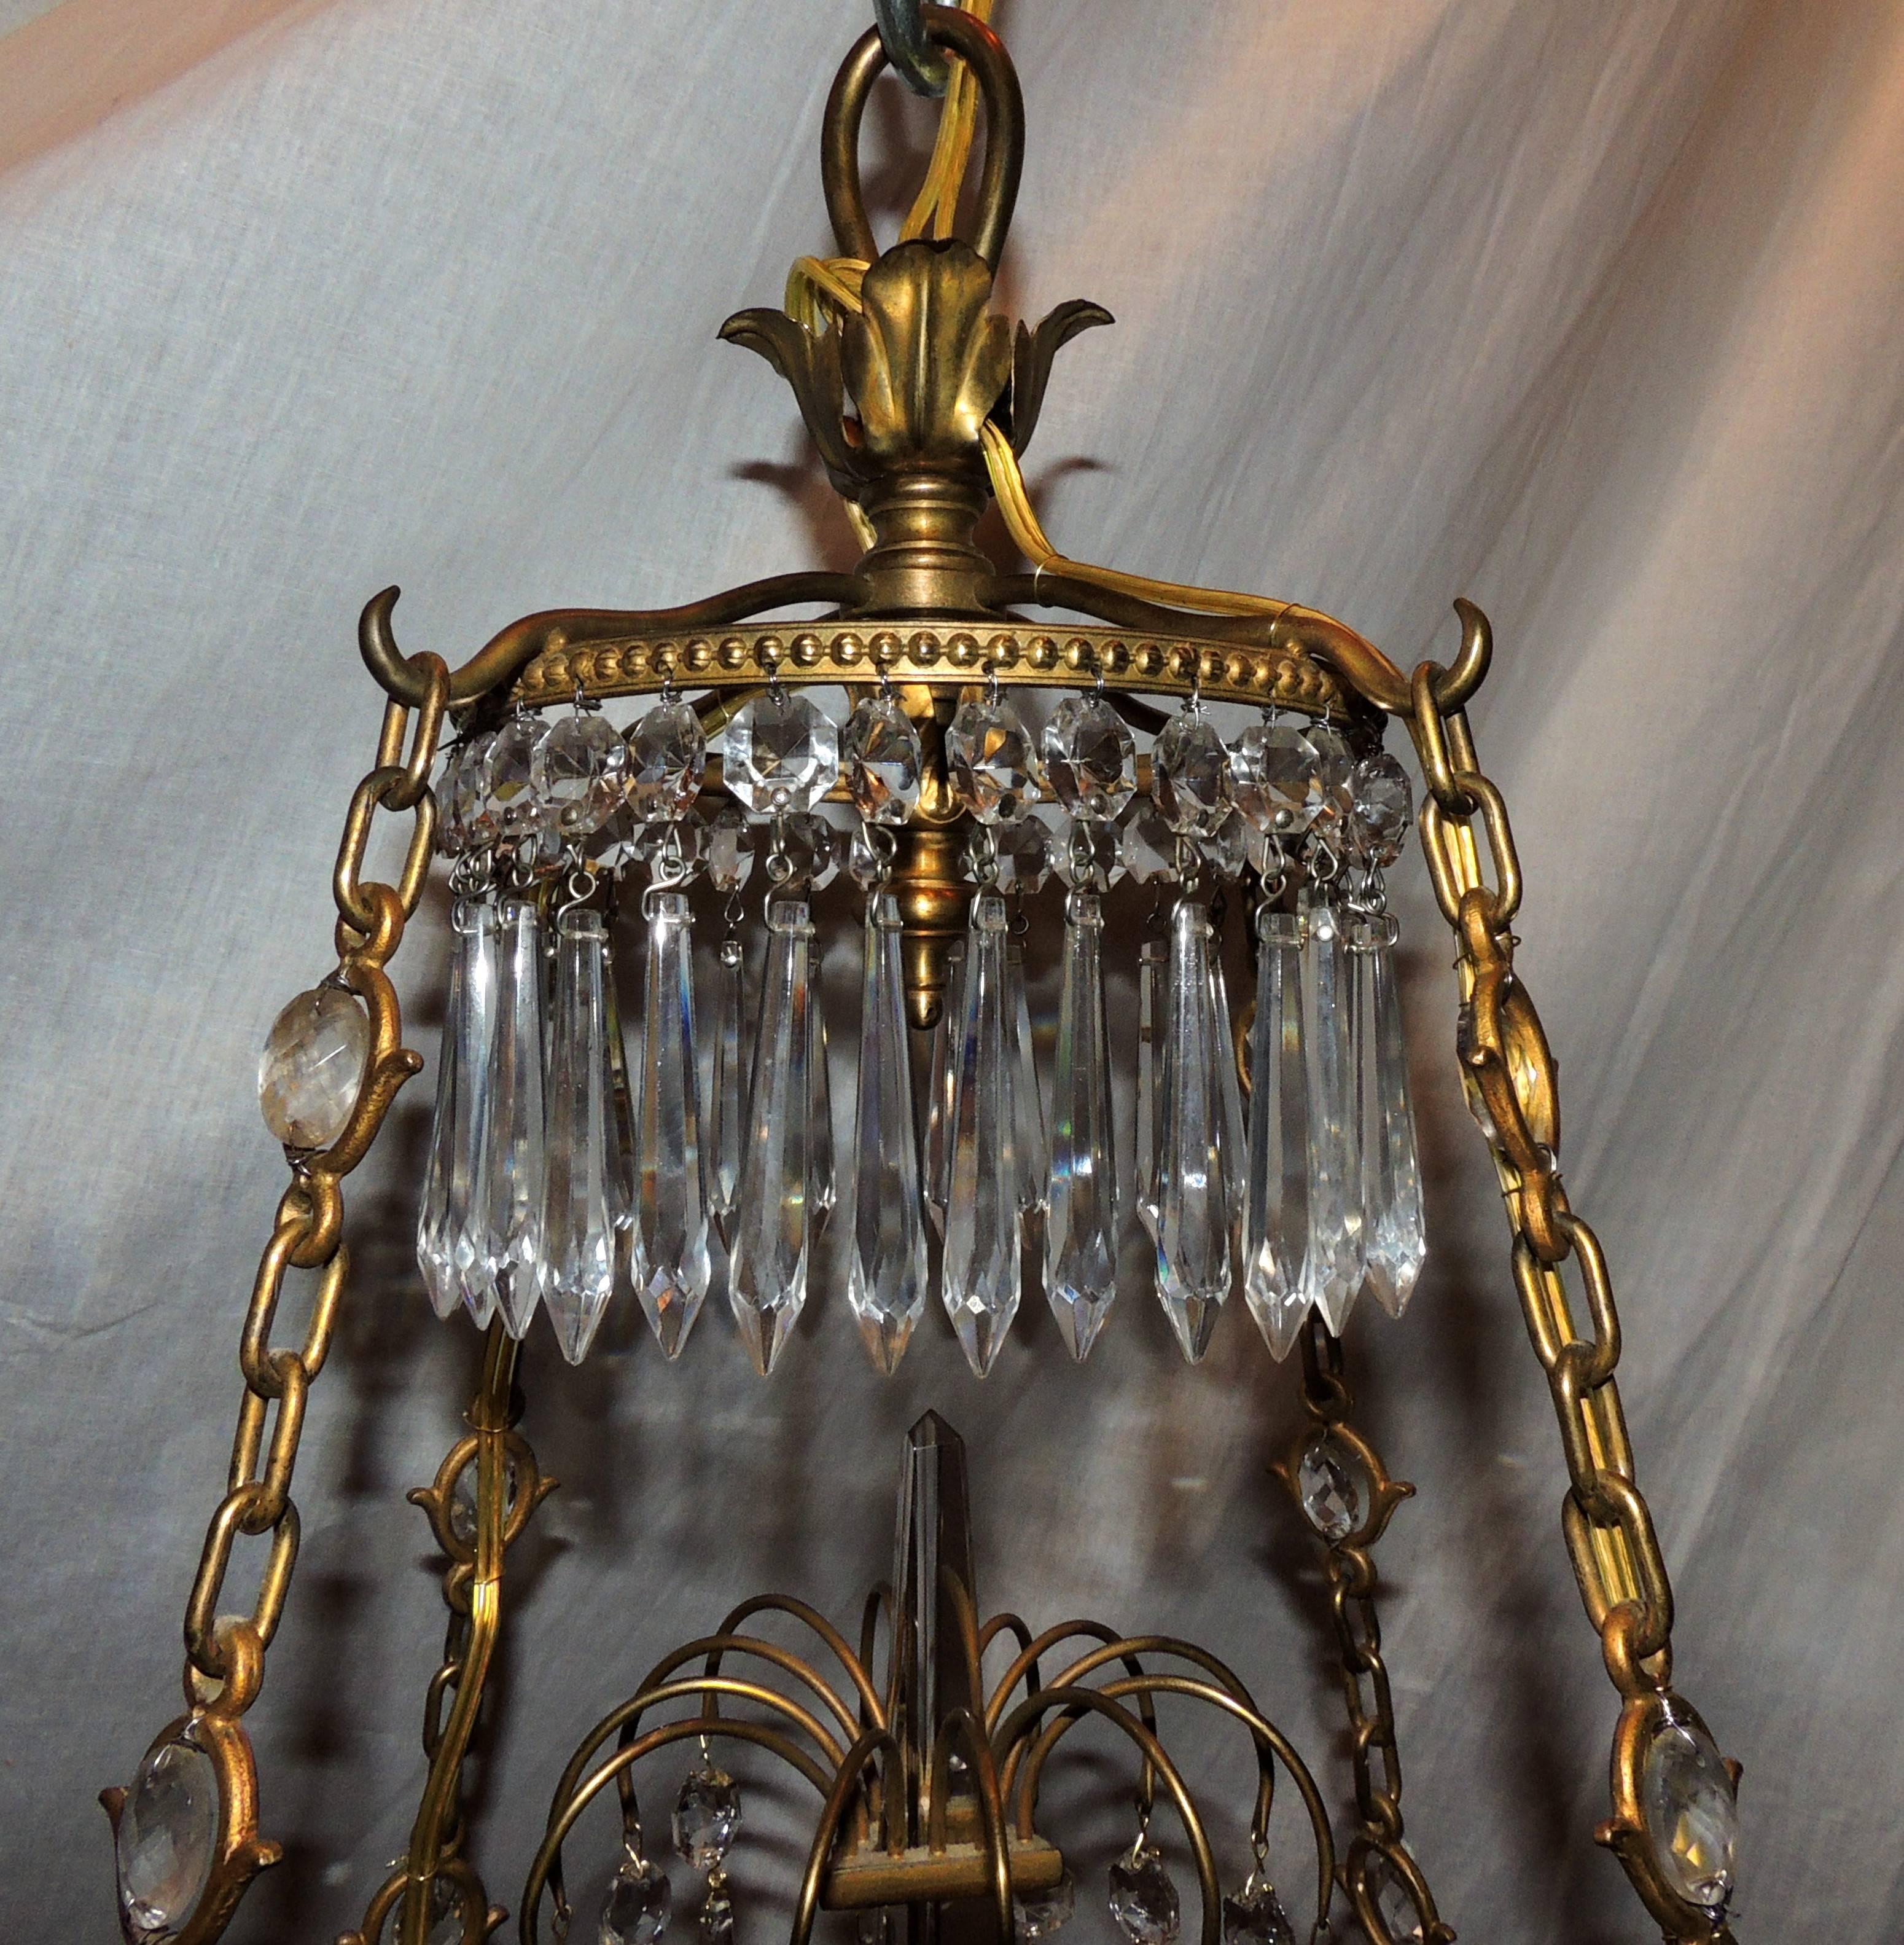 An exceptional French Regency doré bronze and cut crystal centre bowl Empire or Baltic eight-arm chandelier dressed with cut crystals bobeches and surrounding a ribbed gallery rim draping with crystals and finished in the centre with a diamond cut